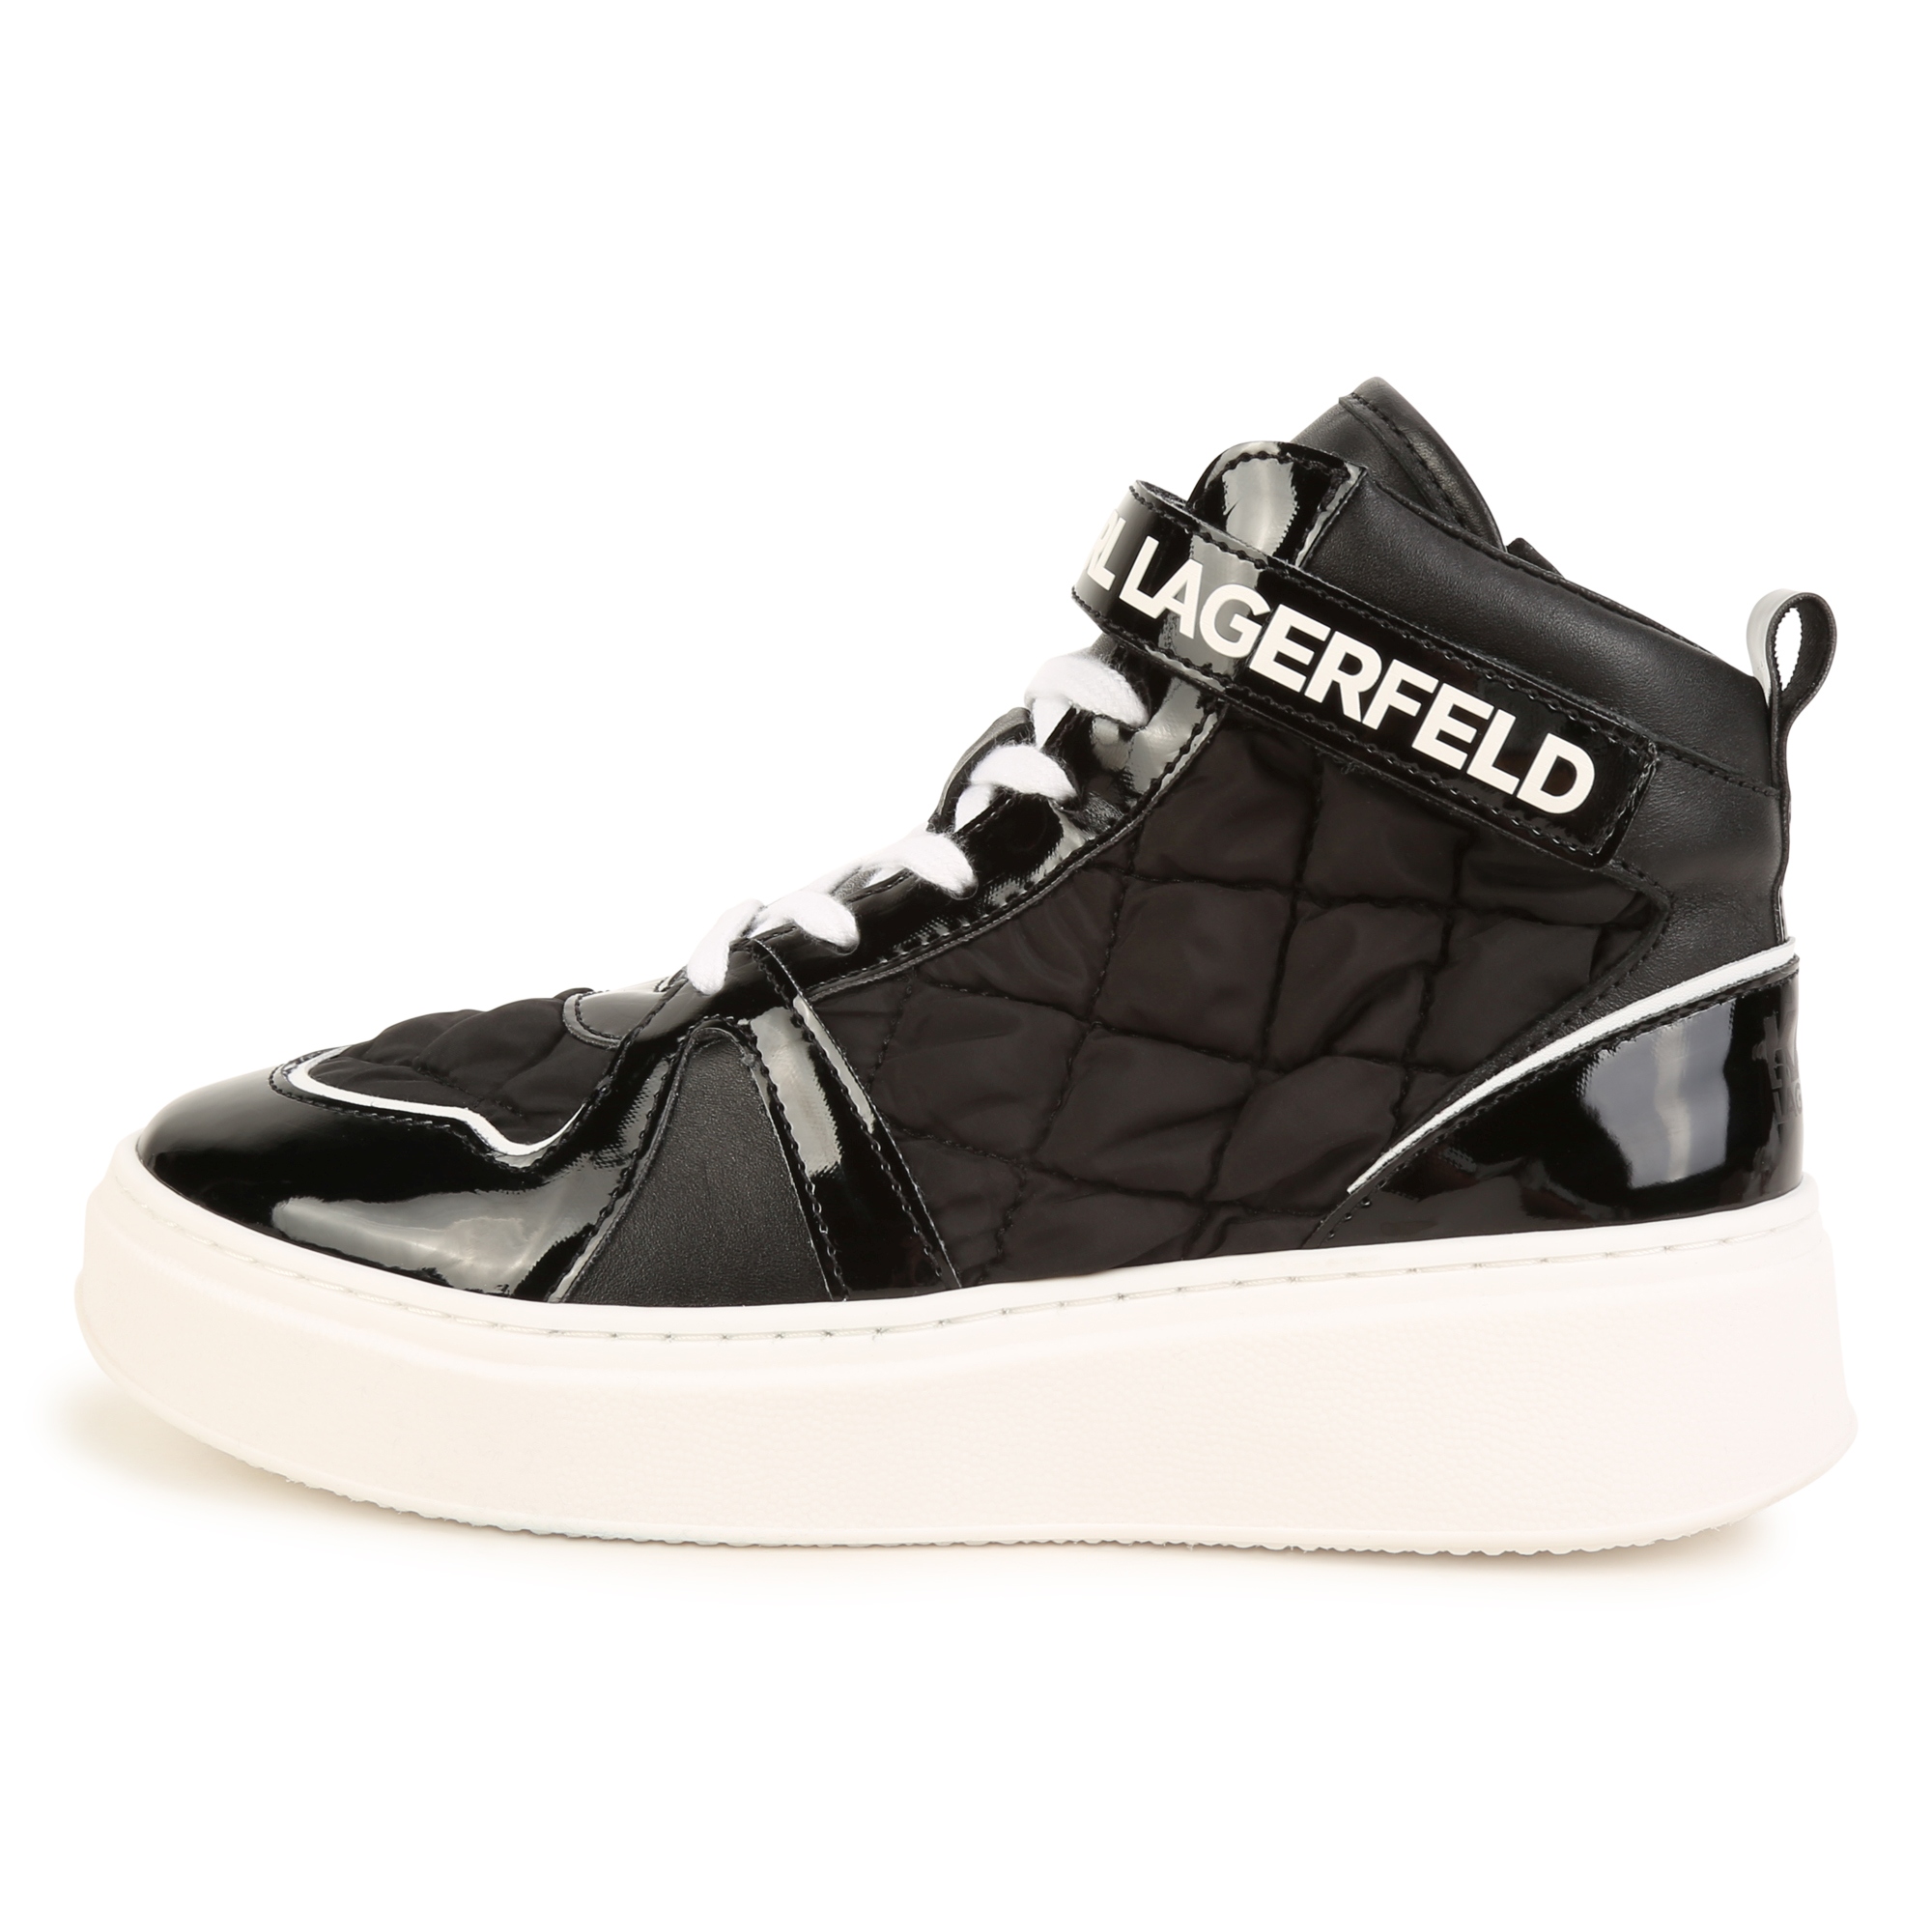 High-top zip-up trainers KARL LAGERFELD KIDS for GIRL